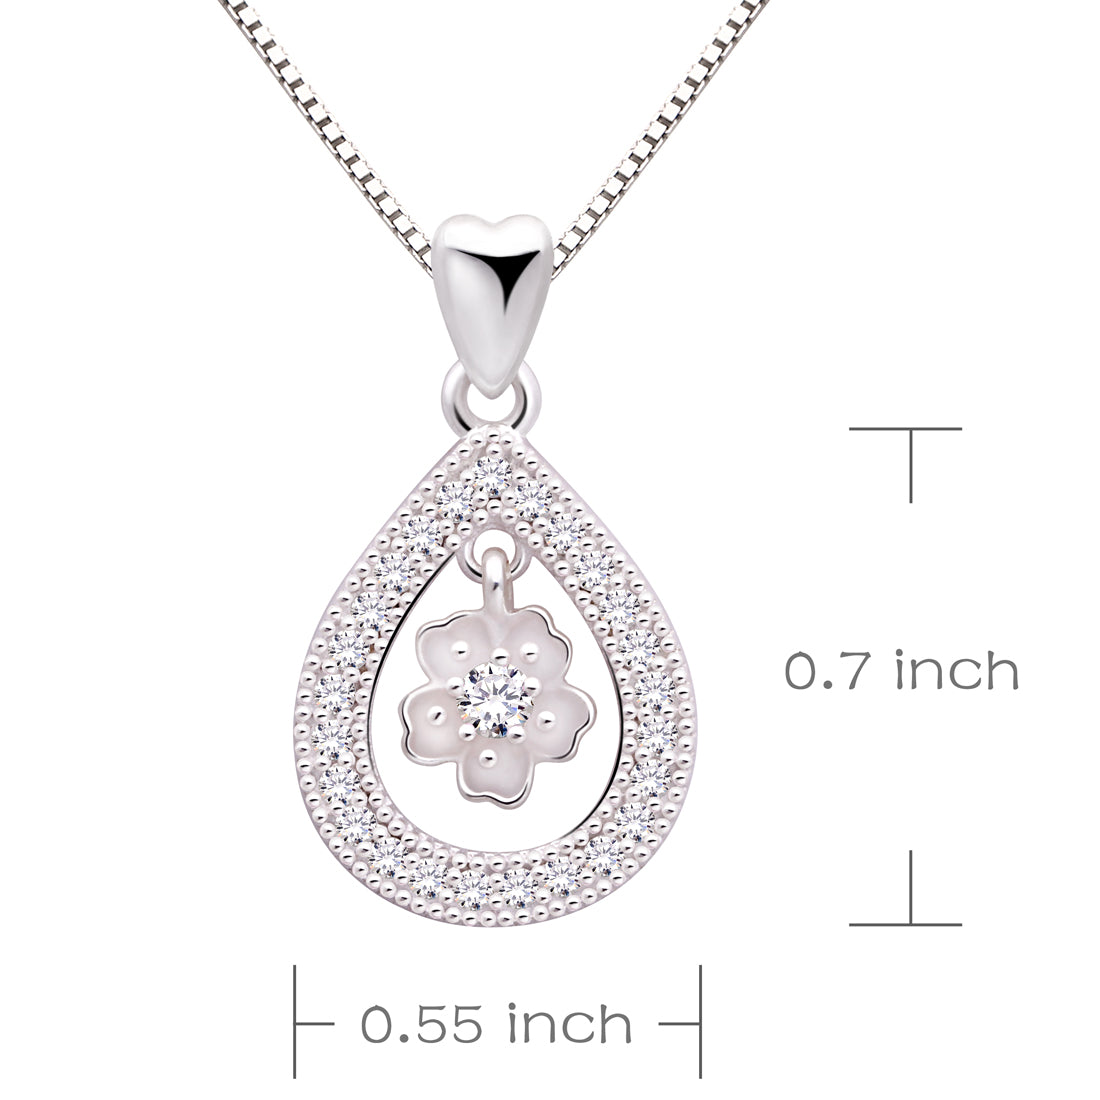 ALOV Jewelry Sterling Silver Endless Love Cubic Zirconia Pendant Necklace